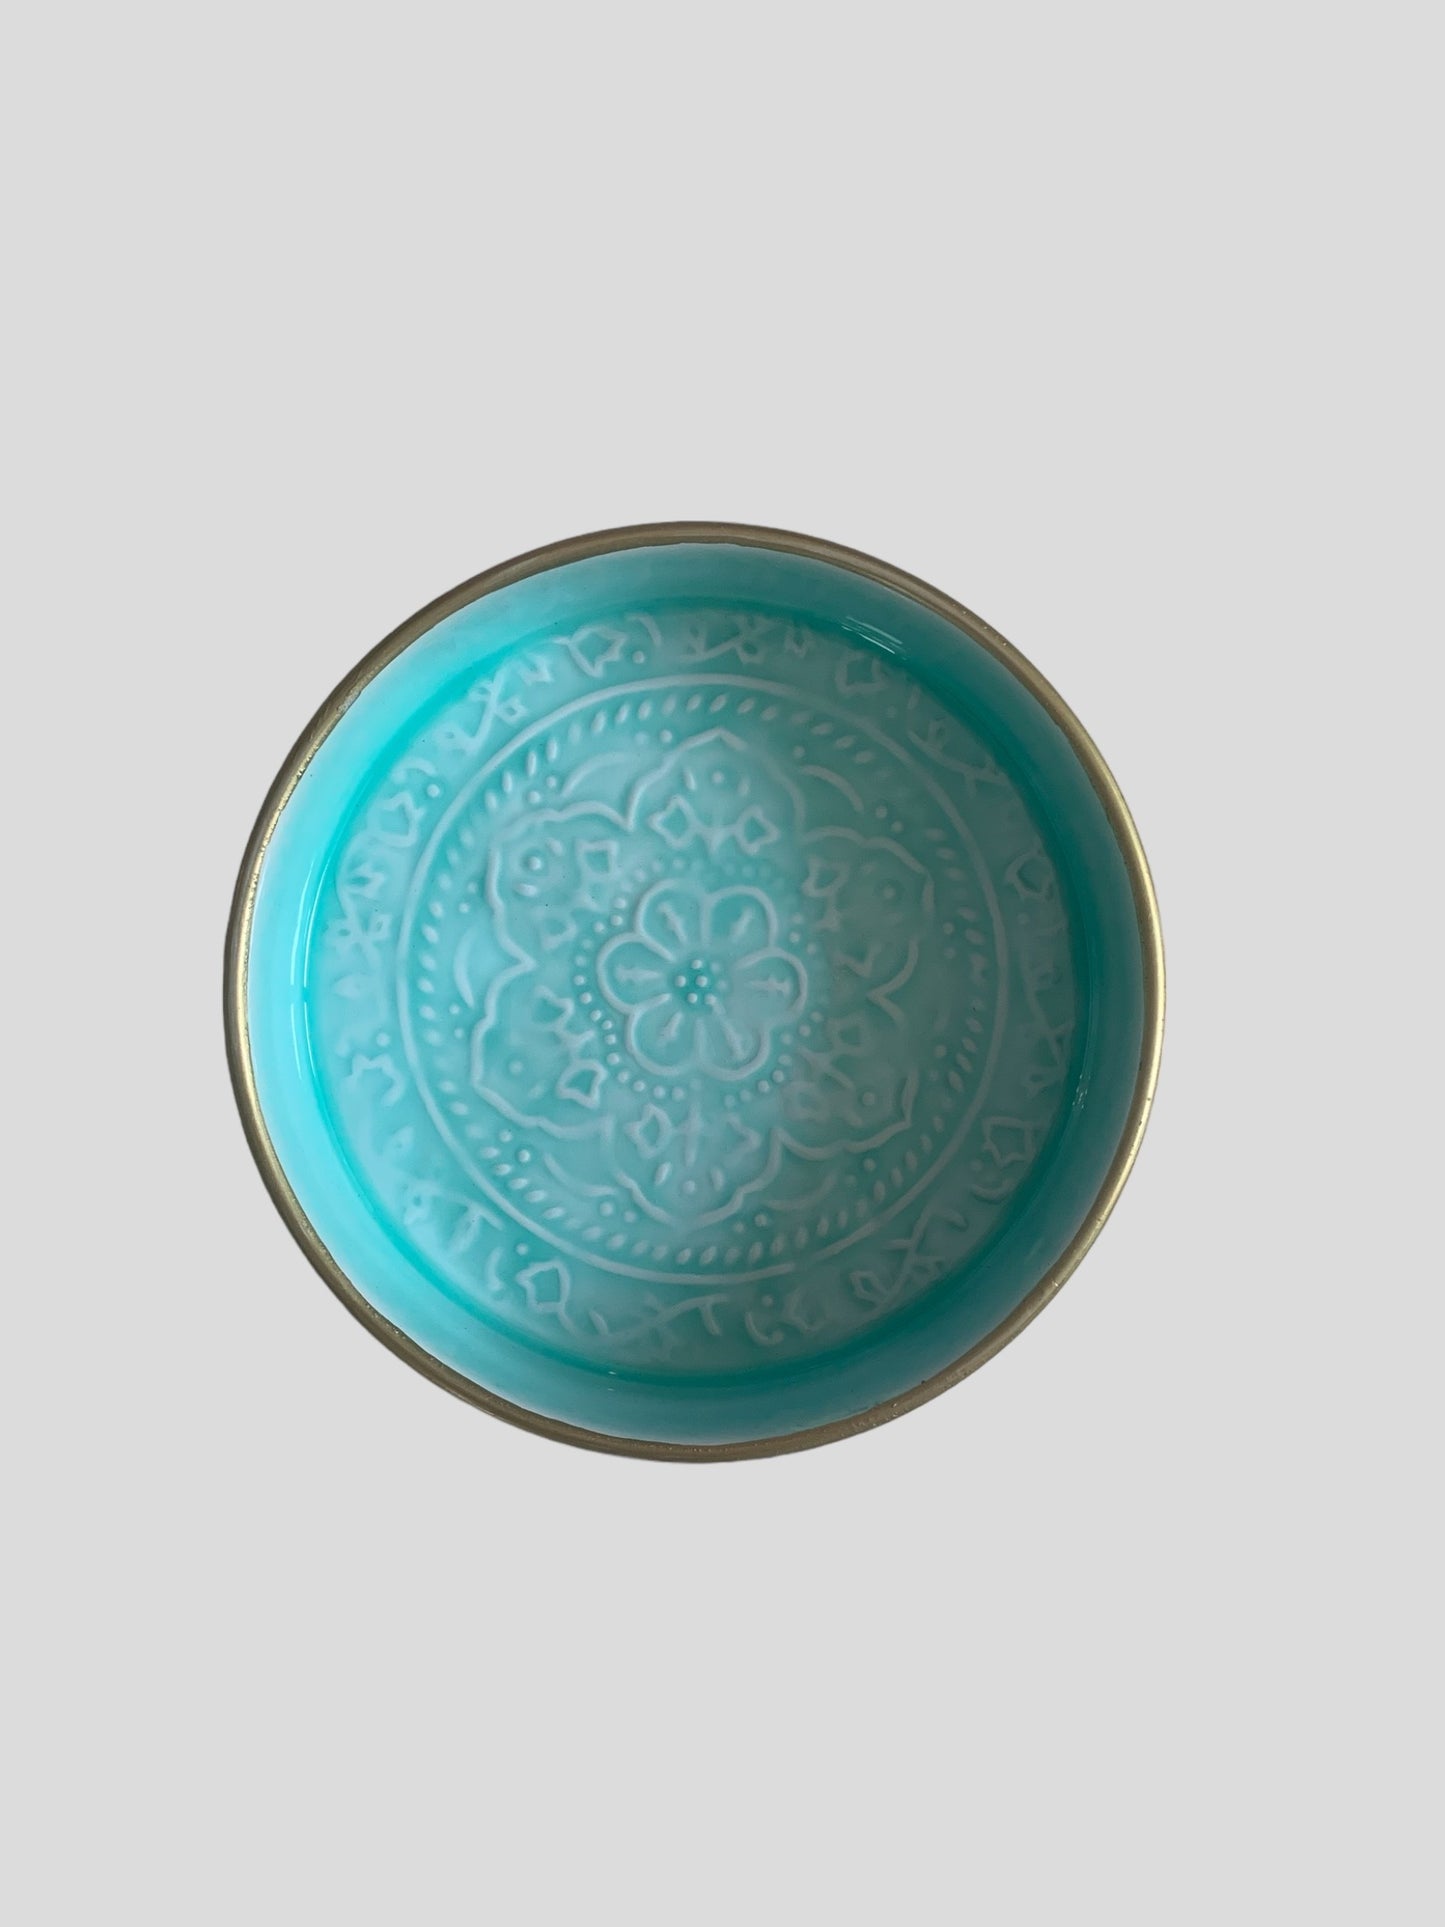 A mini light blue enamel tray with floral embossing detail.